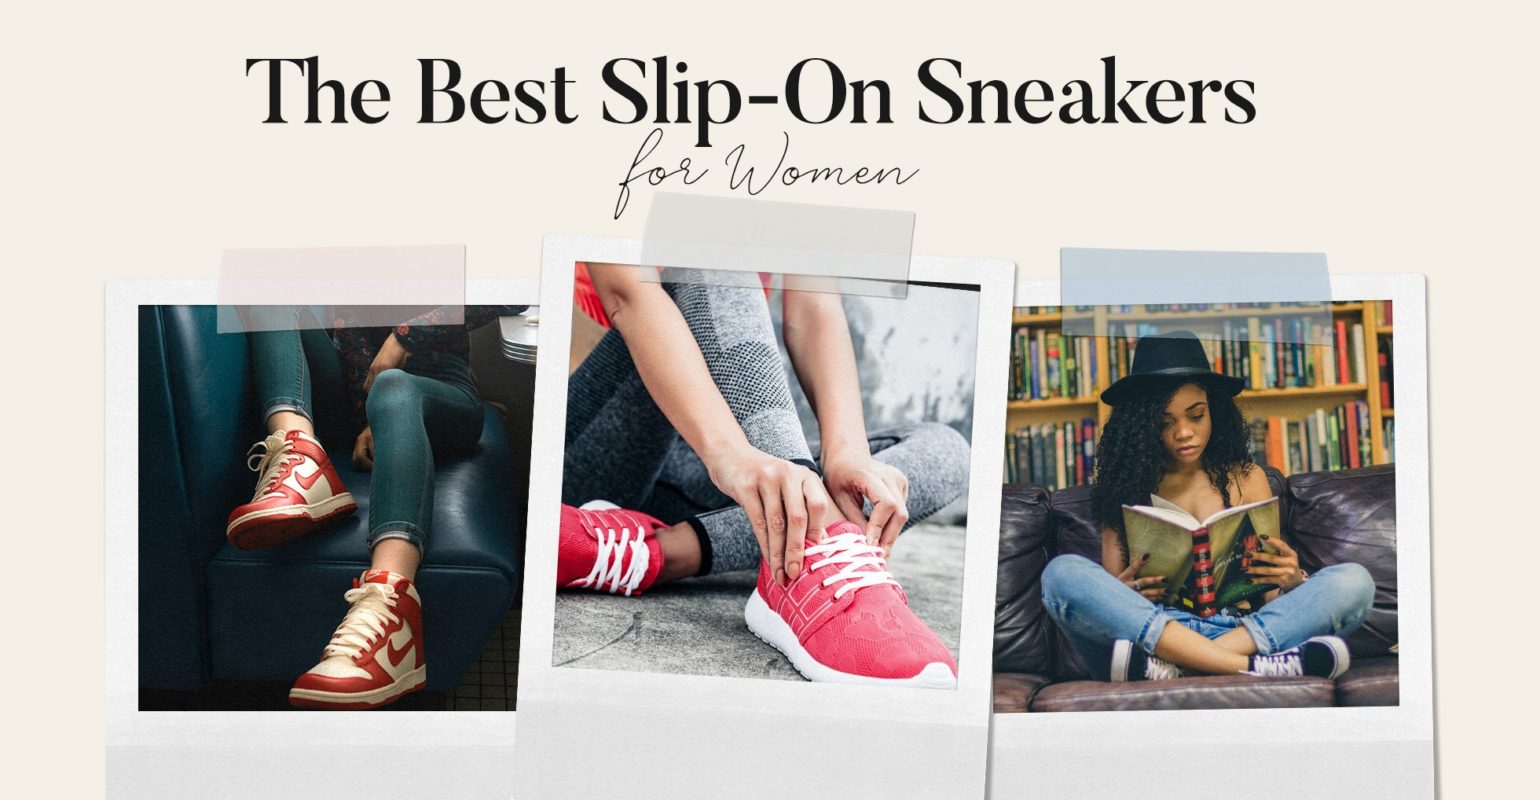 5 Best Slip-On Sneakers for Women Review